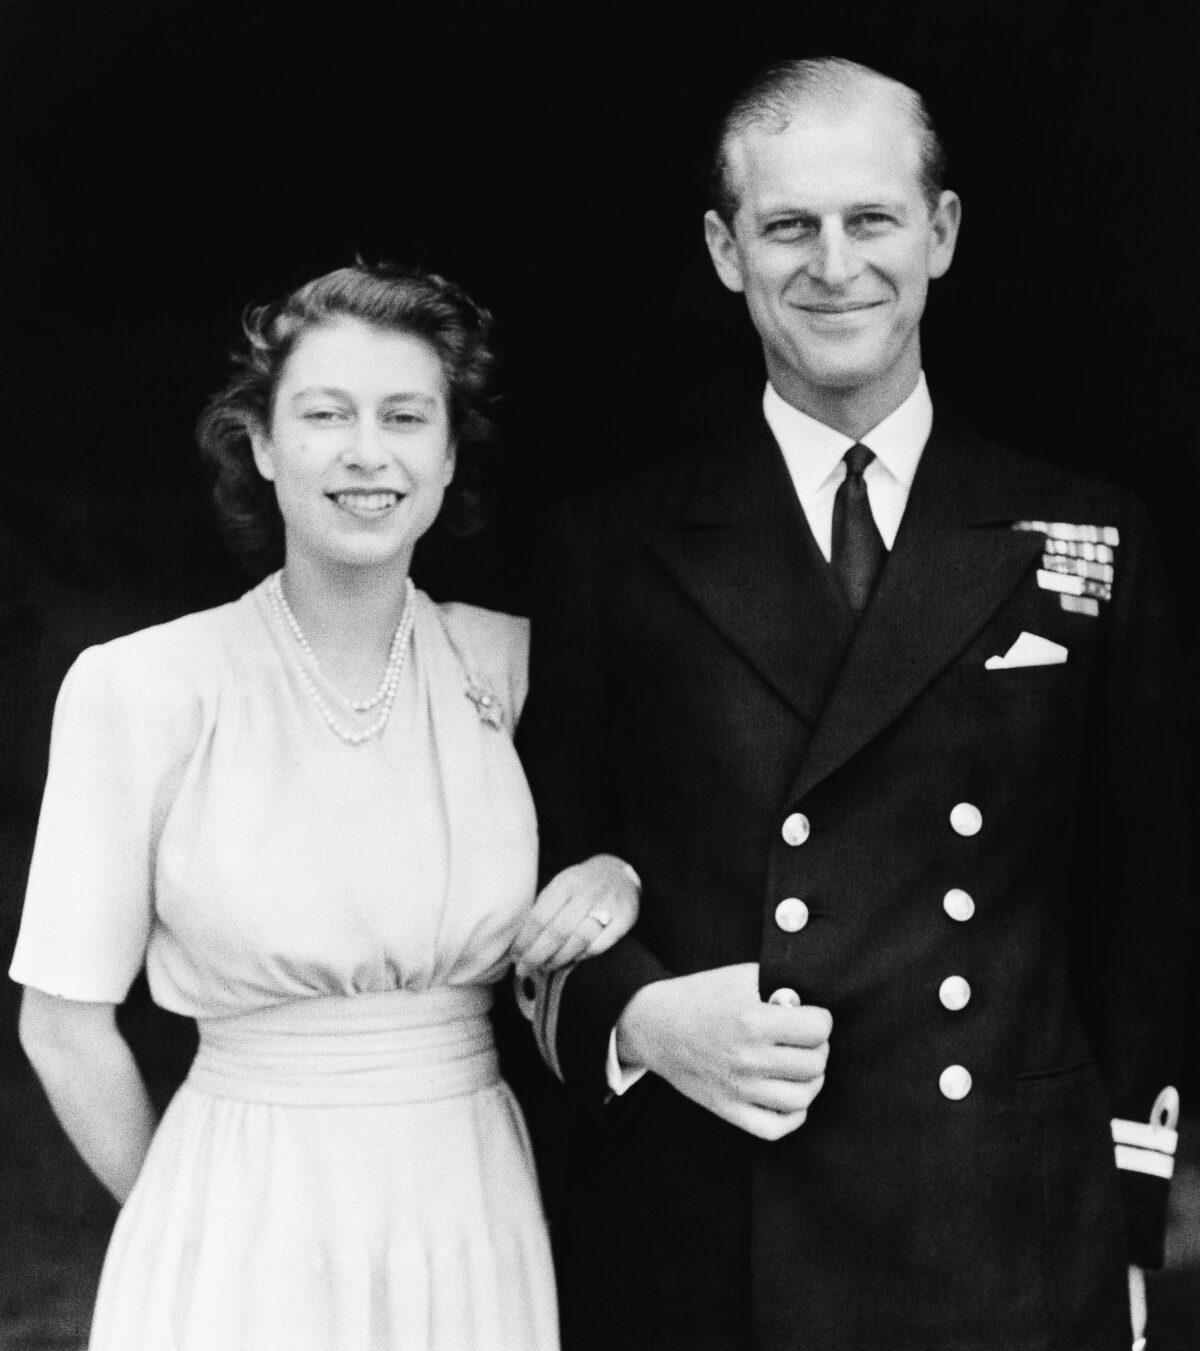 An official photograph of Britain's Princess Elizabeth and her fiance, Lieut. Philip Mountbatten in London on July 10, 1947. (AP Photo/File)